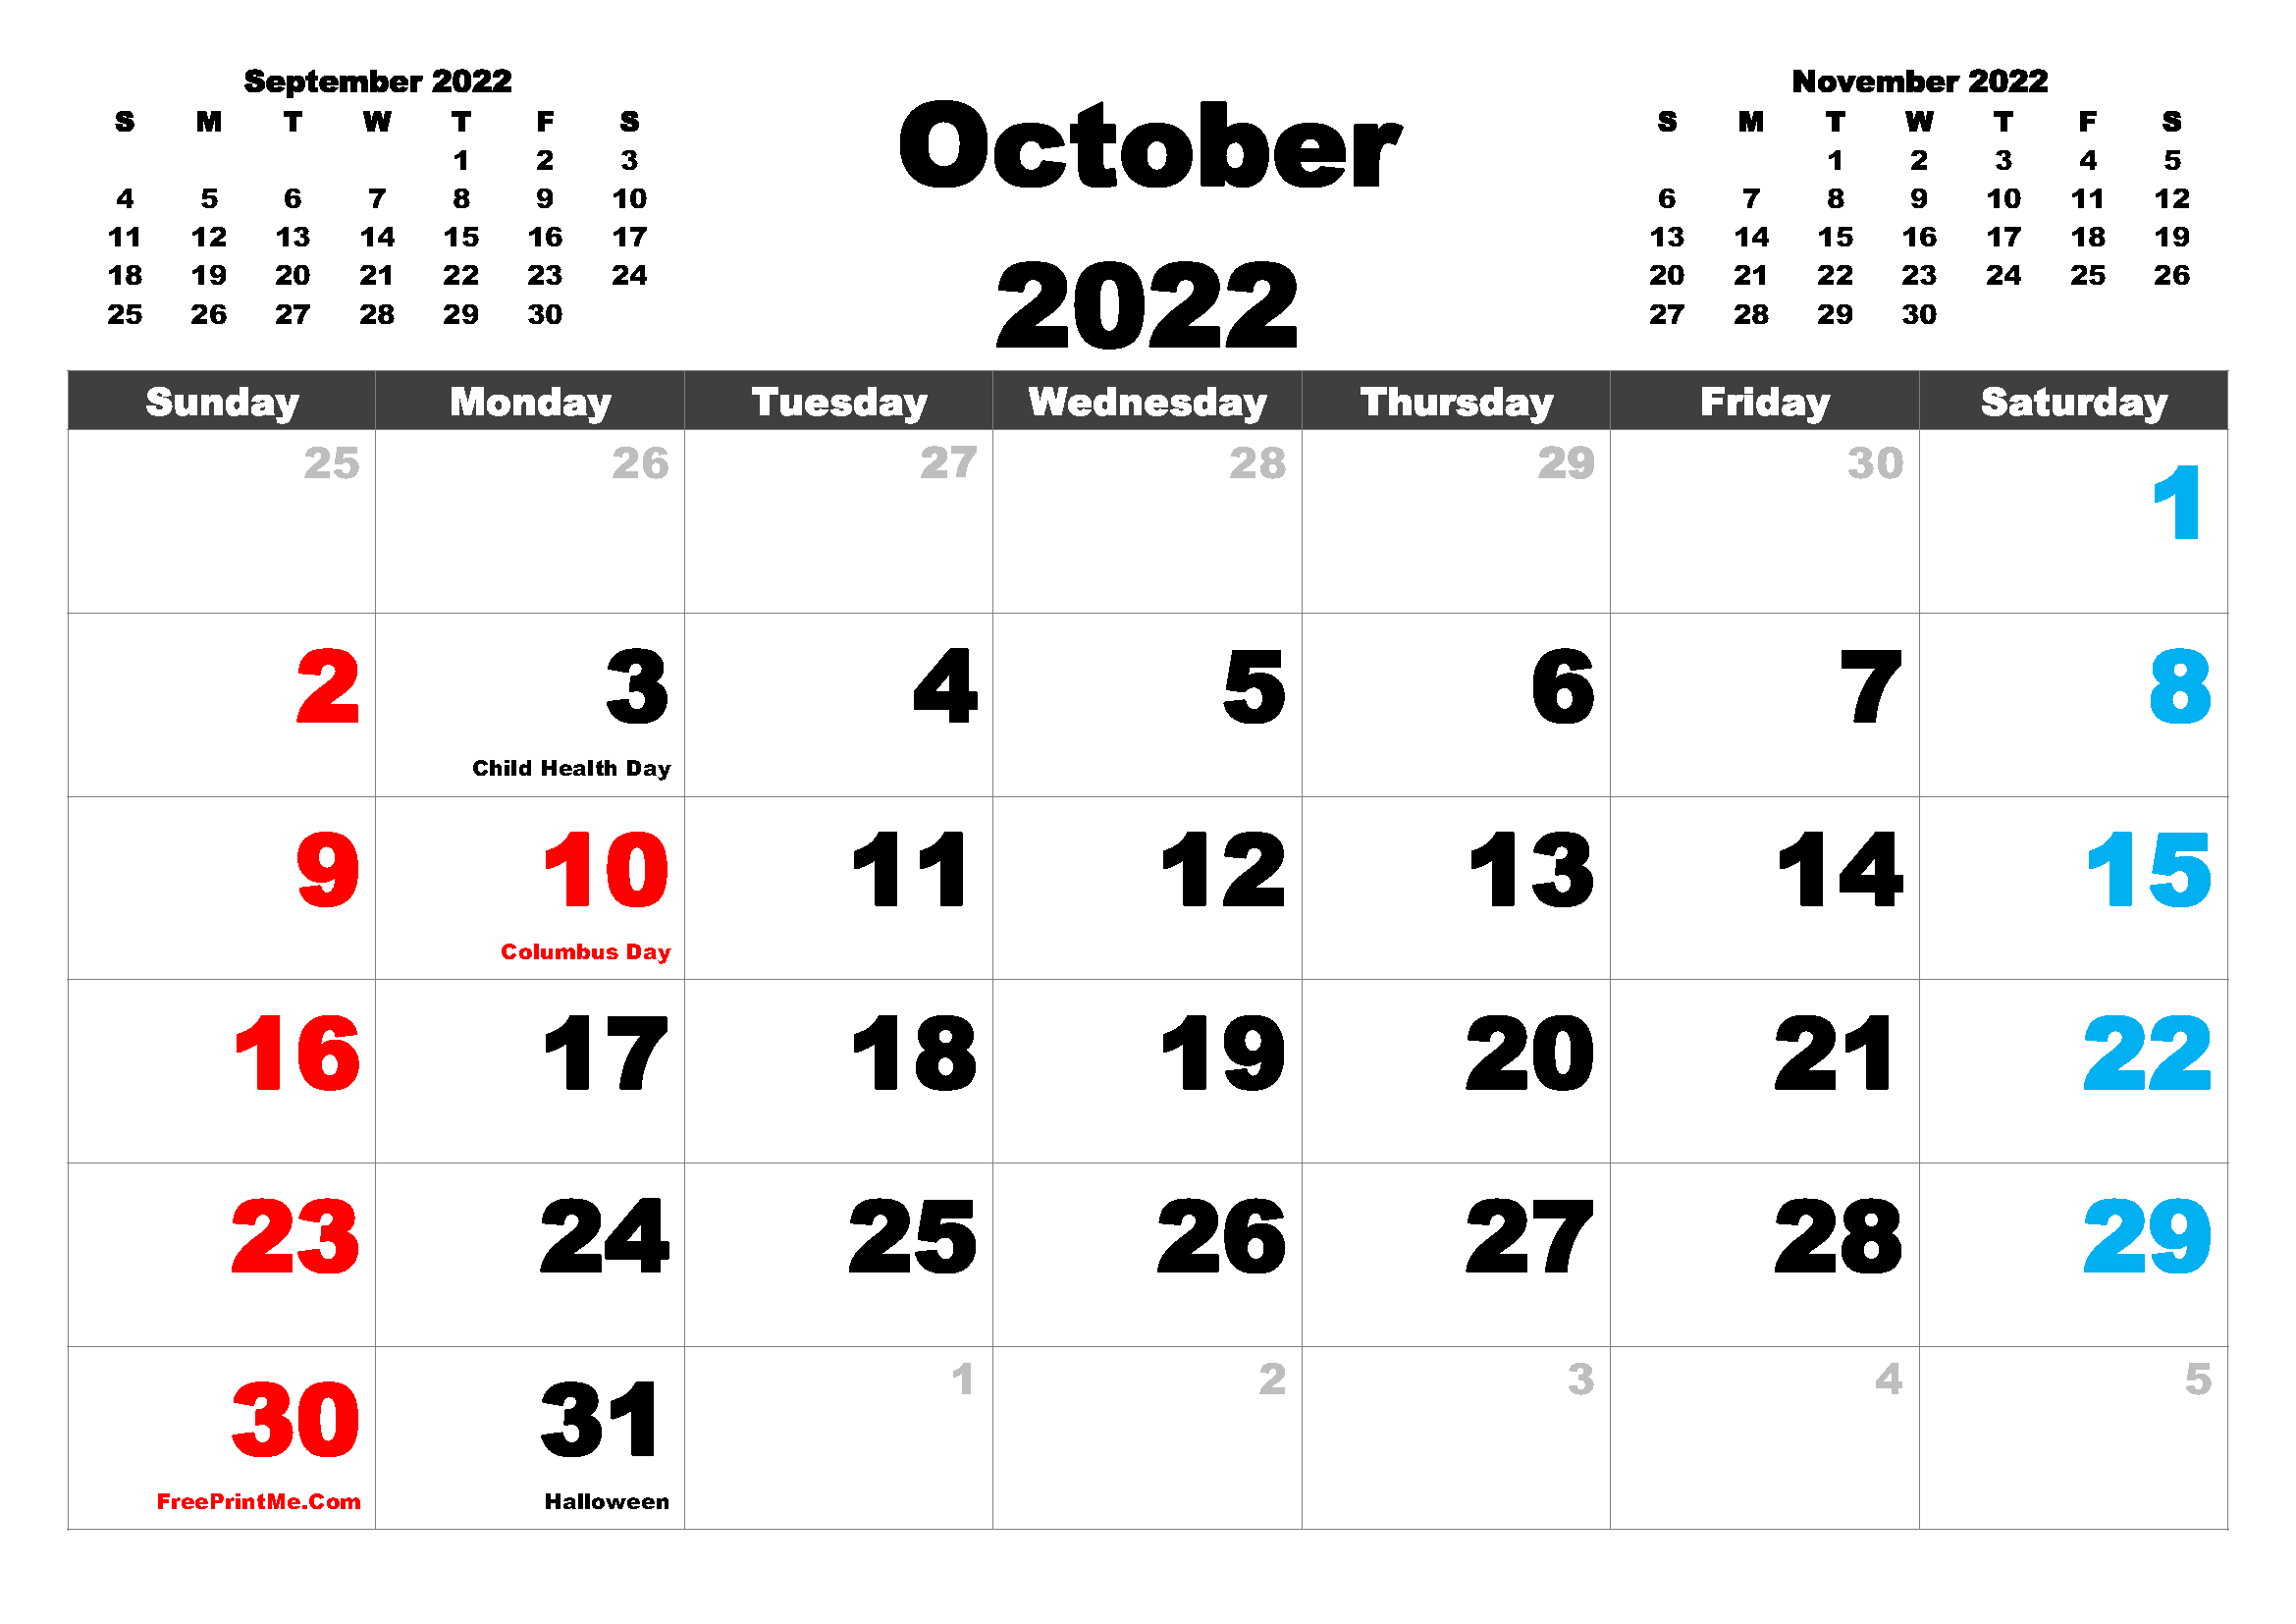 Free Printable Monthly Calendar October 2022 Free Printable October 2022 Calendar Pdf, Png Image